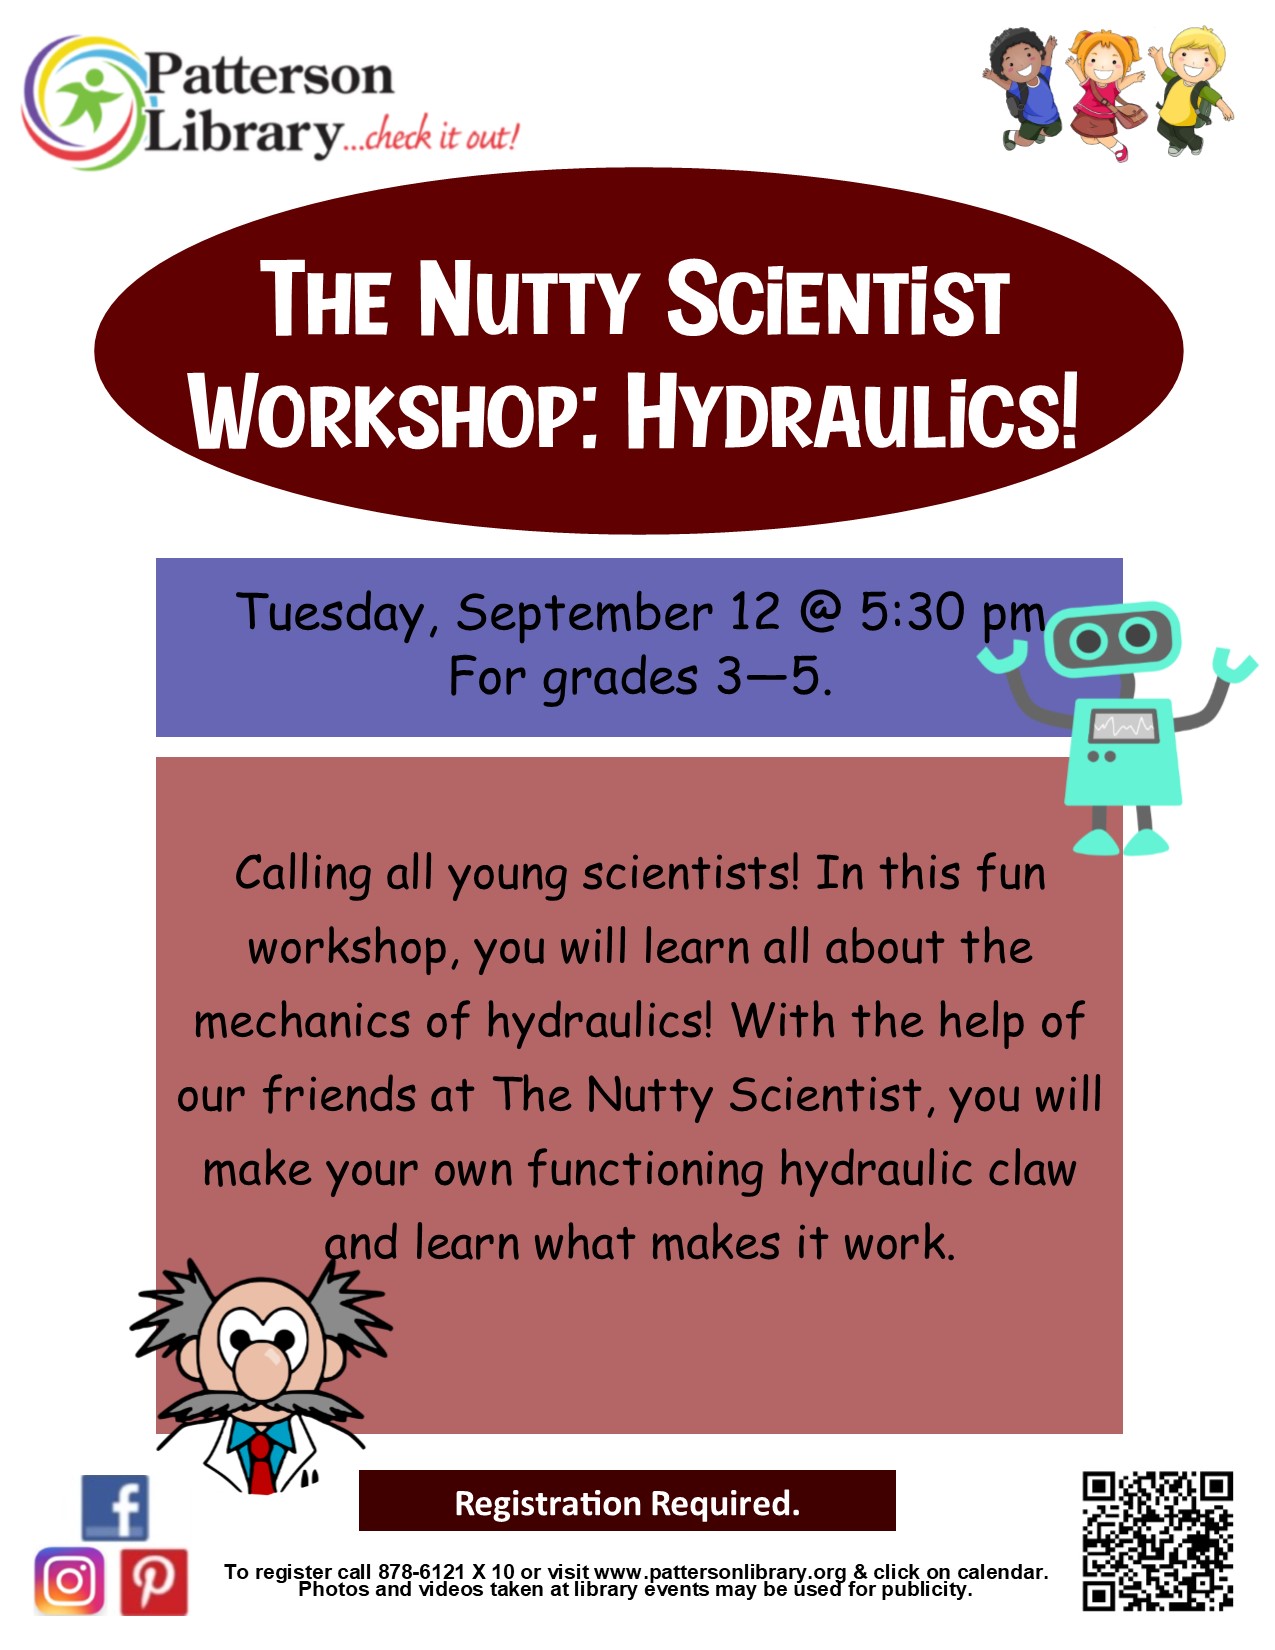 Learn all about the mechanics of hydraulics!